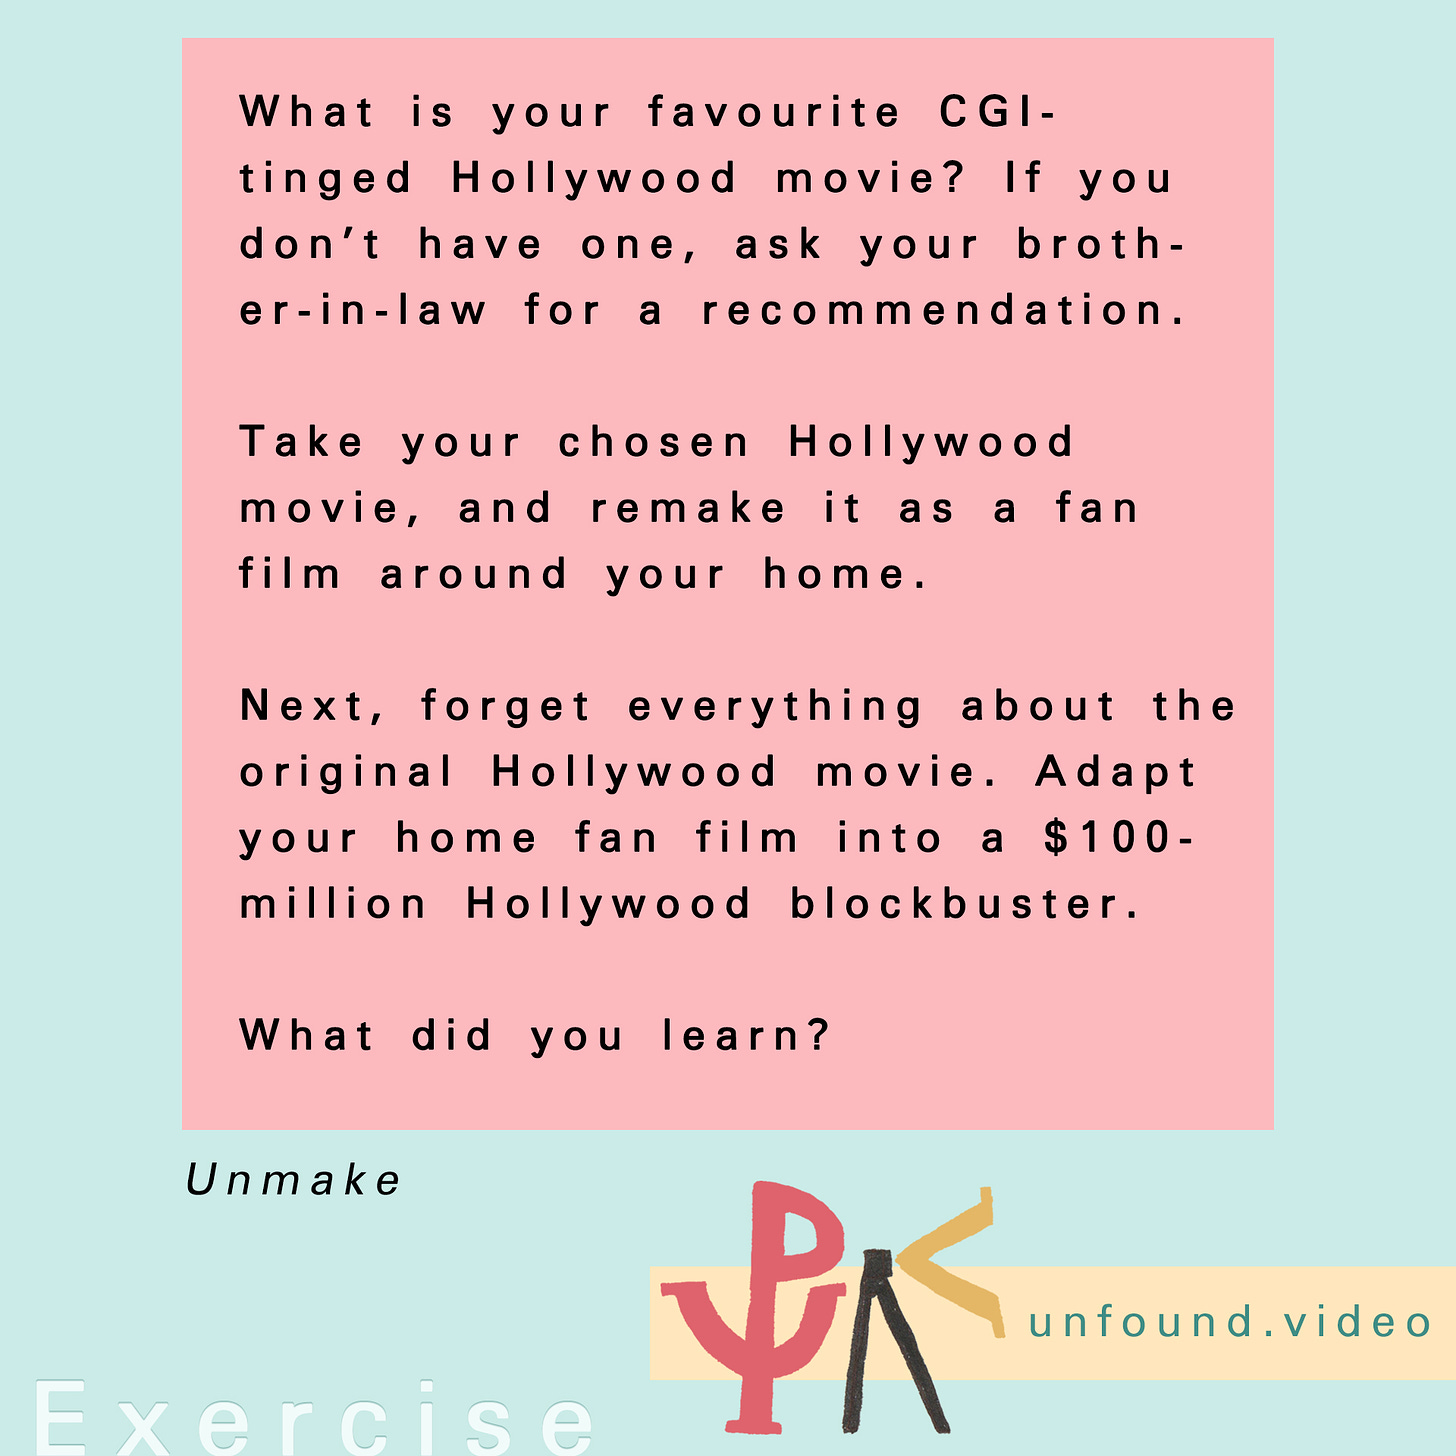 Text that reads: Exercise: What is your favourite CGI-tinged Hollywood movie? If you don’t have one, ask your brother-in-law for a recommendation. Take your chosen Hollywood movie, and remake it as a fan film around your home. Next, forget everything about the original Hollywood movie. Adapt your home fan film into a $100-million Hollywood blockbuster. What did you learn?